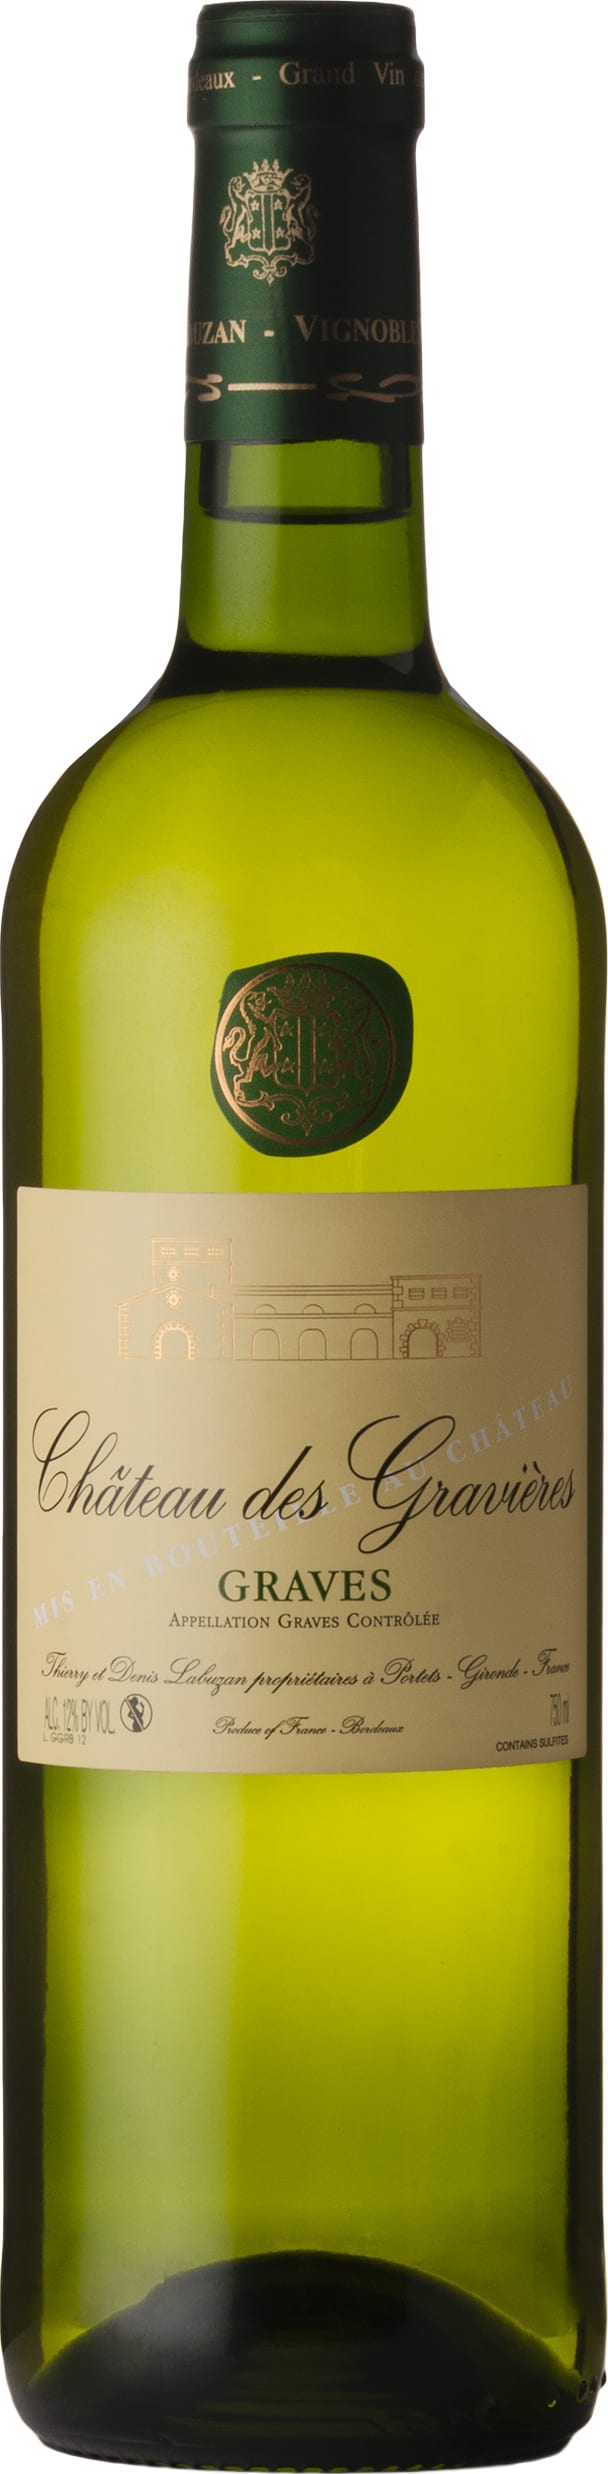 Chateau des Gravieres Graves Blanc 2022 75cl - Buy Chateau des Gravieres Wines from GREAT WINES DIRECT wine shop